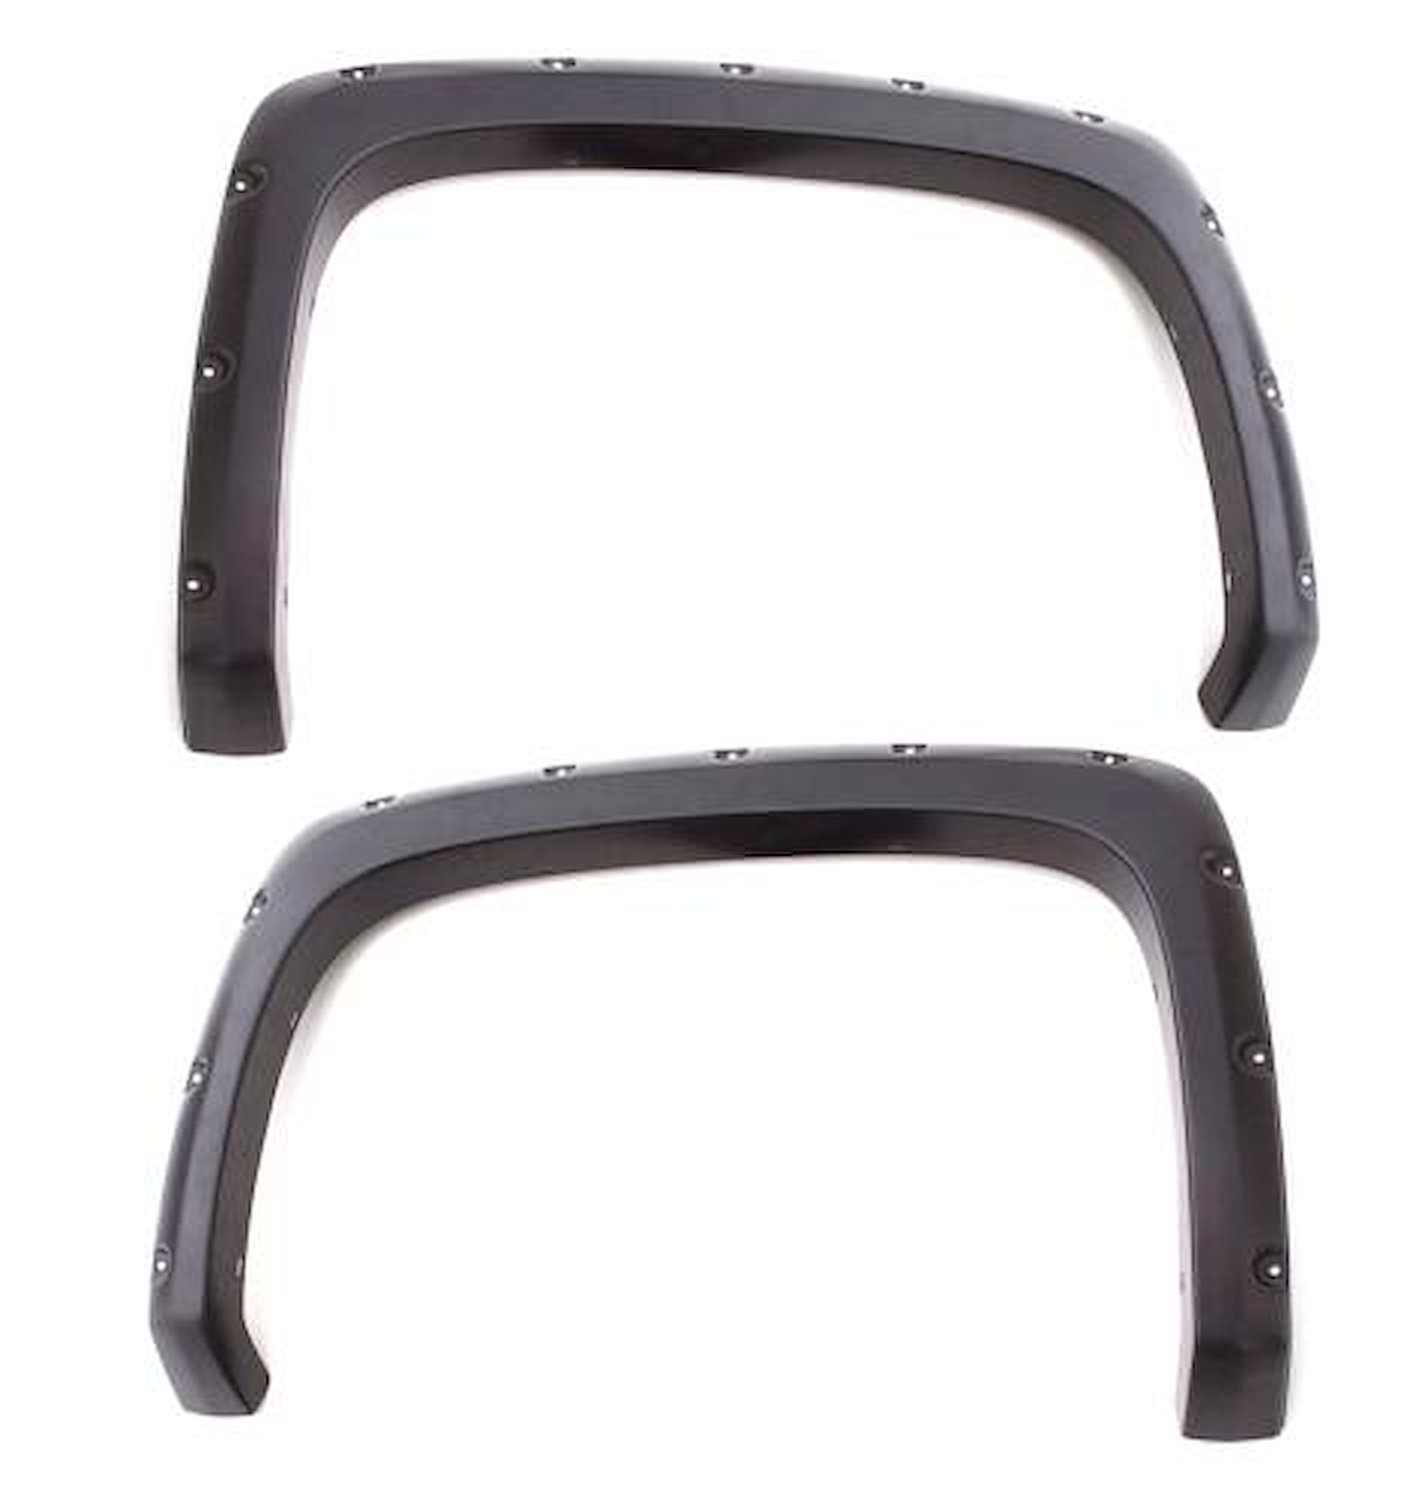 RX-Rivet Style Rear Fender Flares For Select Late-Model